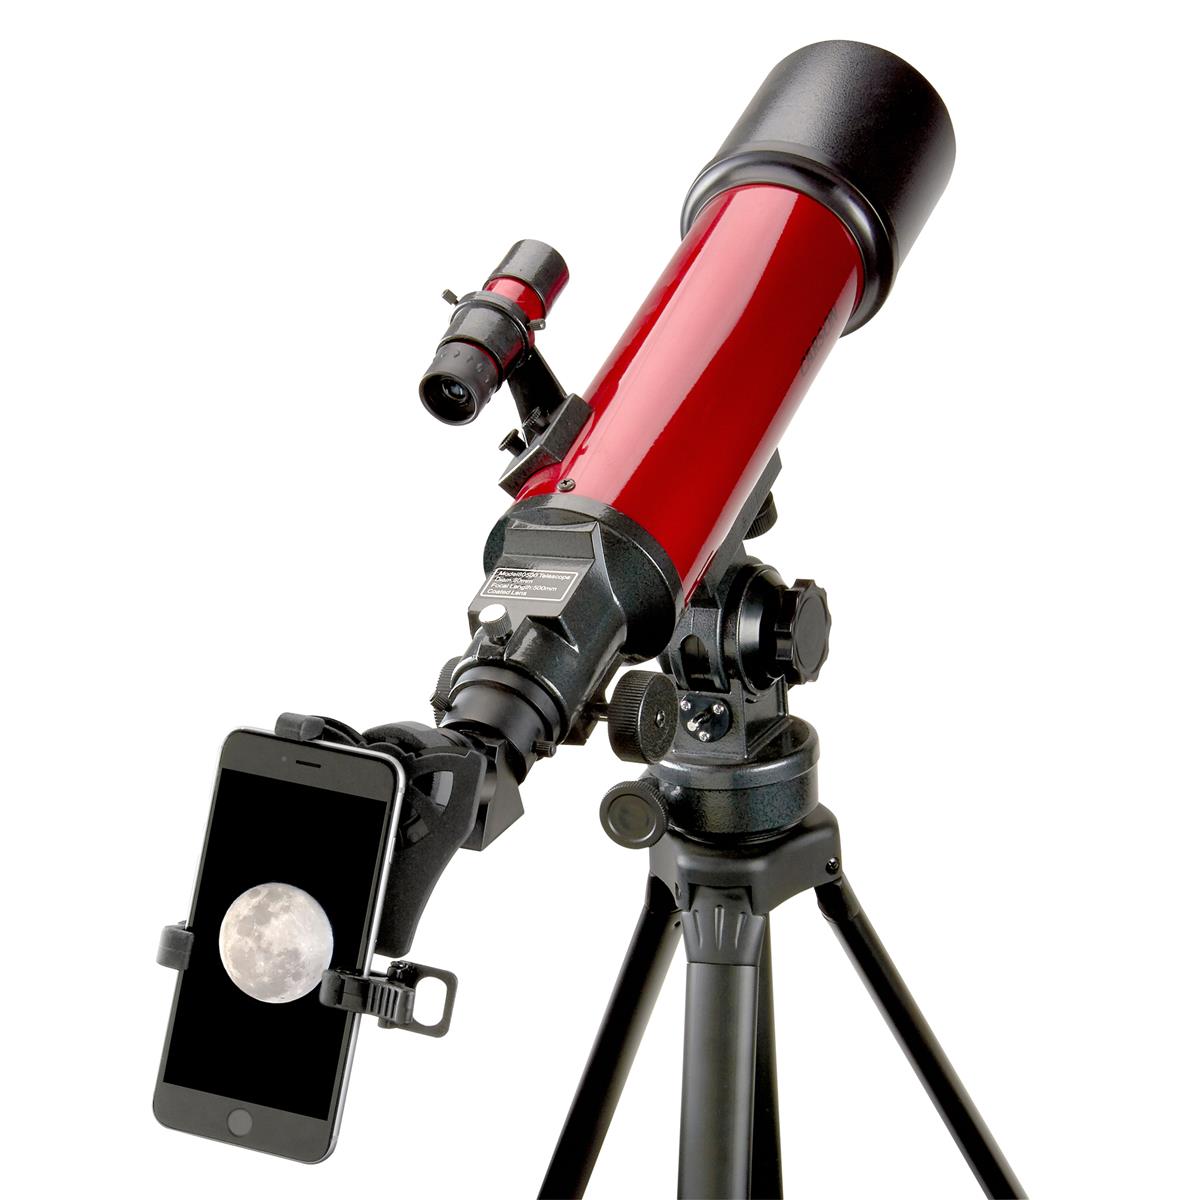 

Carson Red Planet Series 25-56x80 Refractor Telescope with Smartphone Adapter